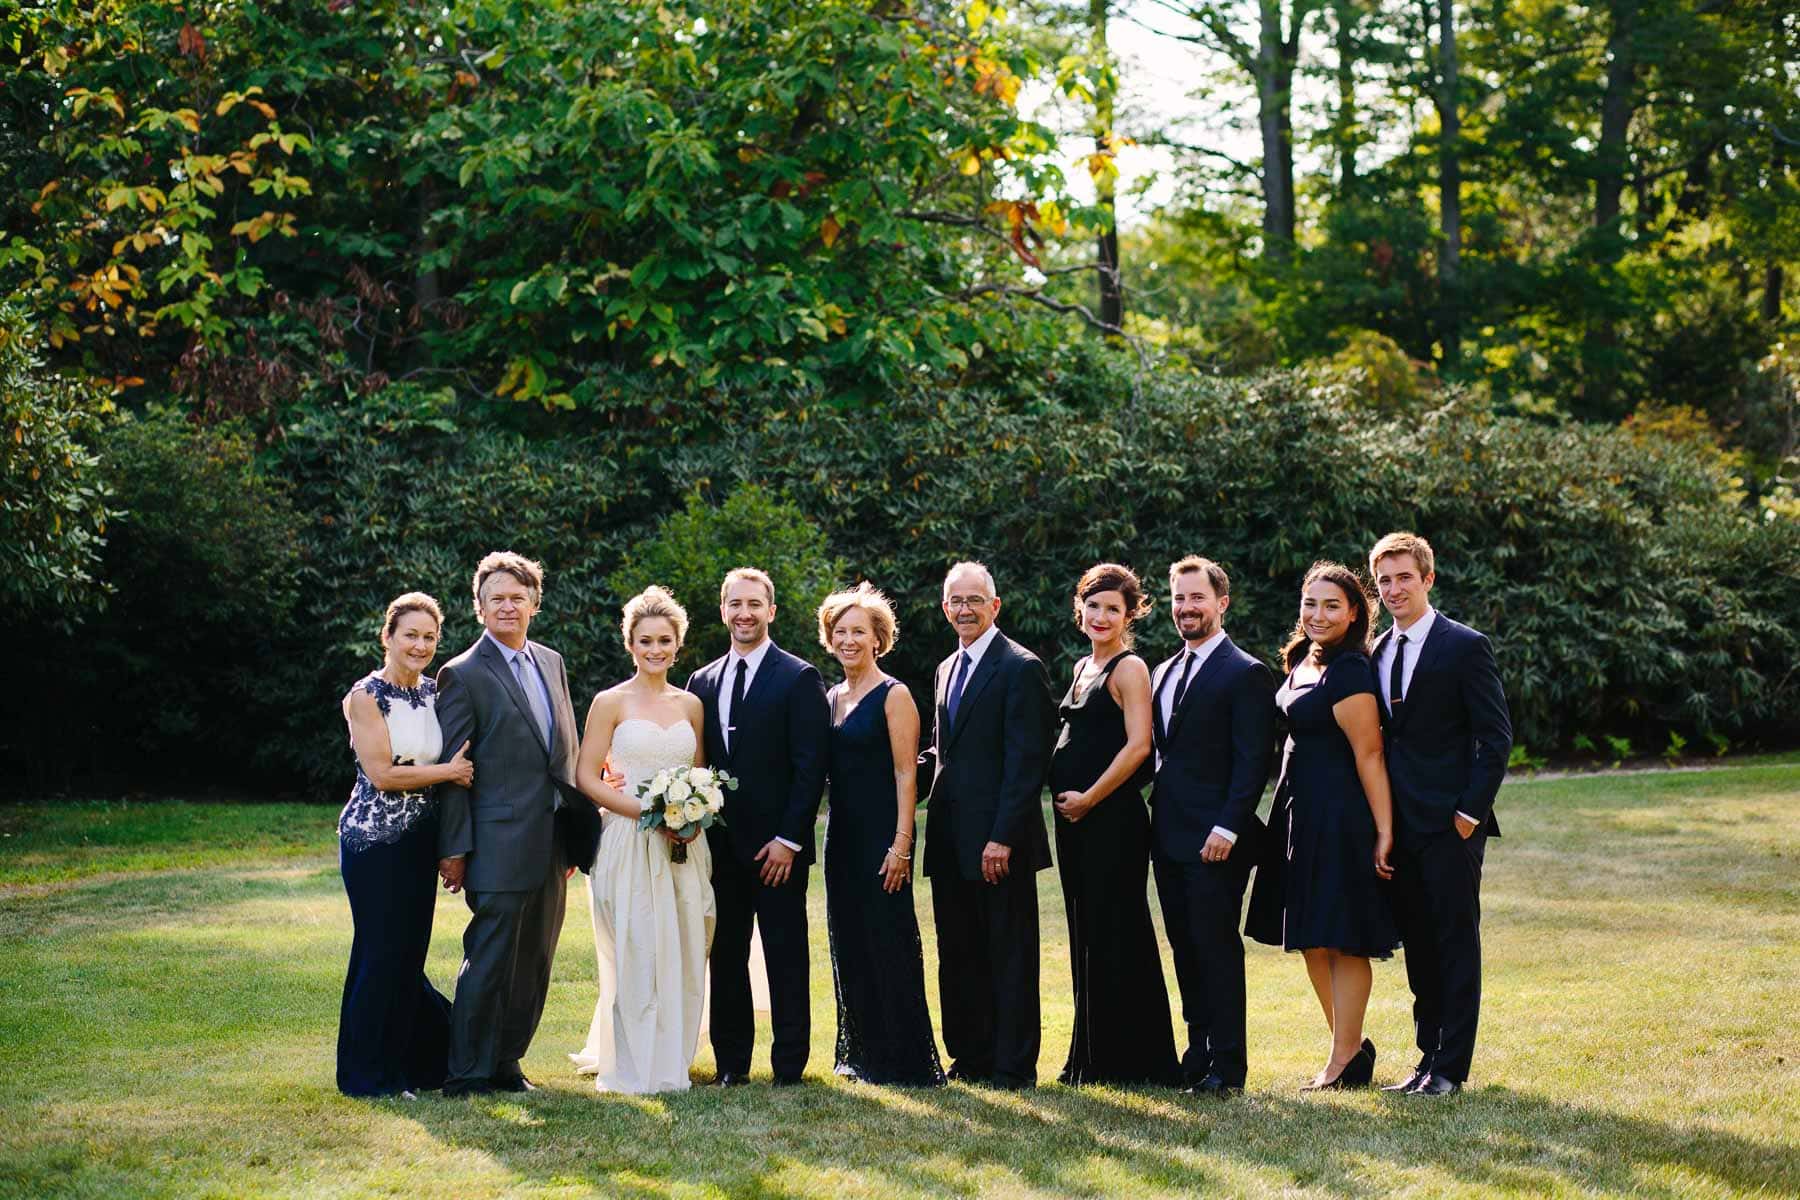 posed family photos at outdoor estate wedding